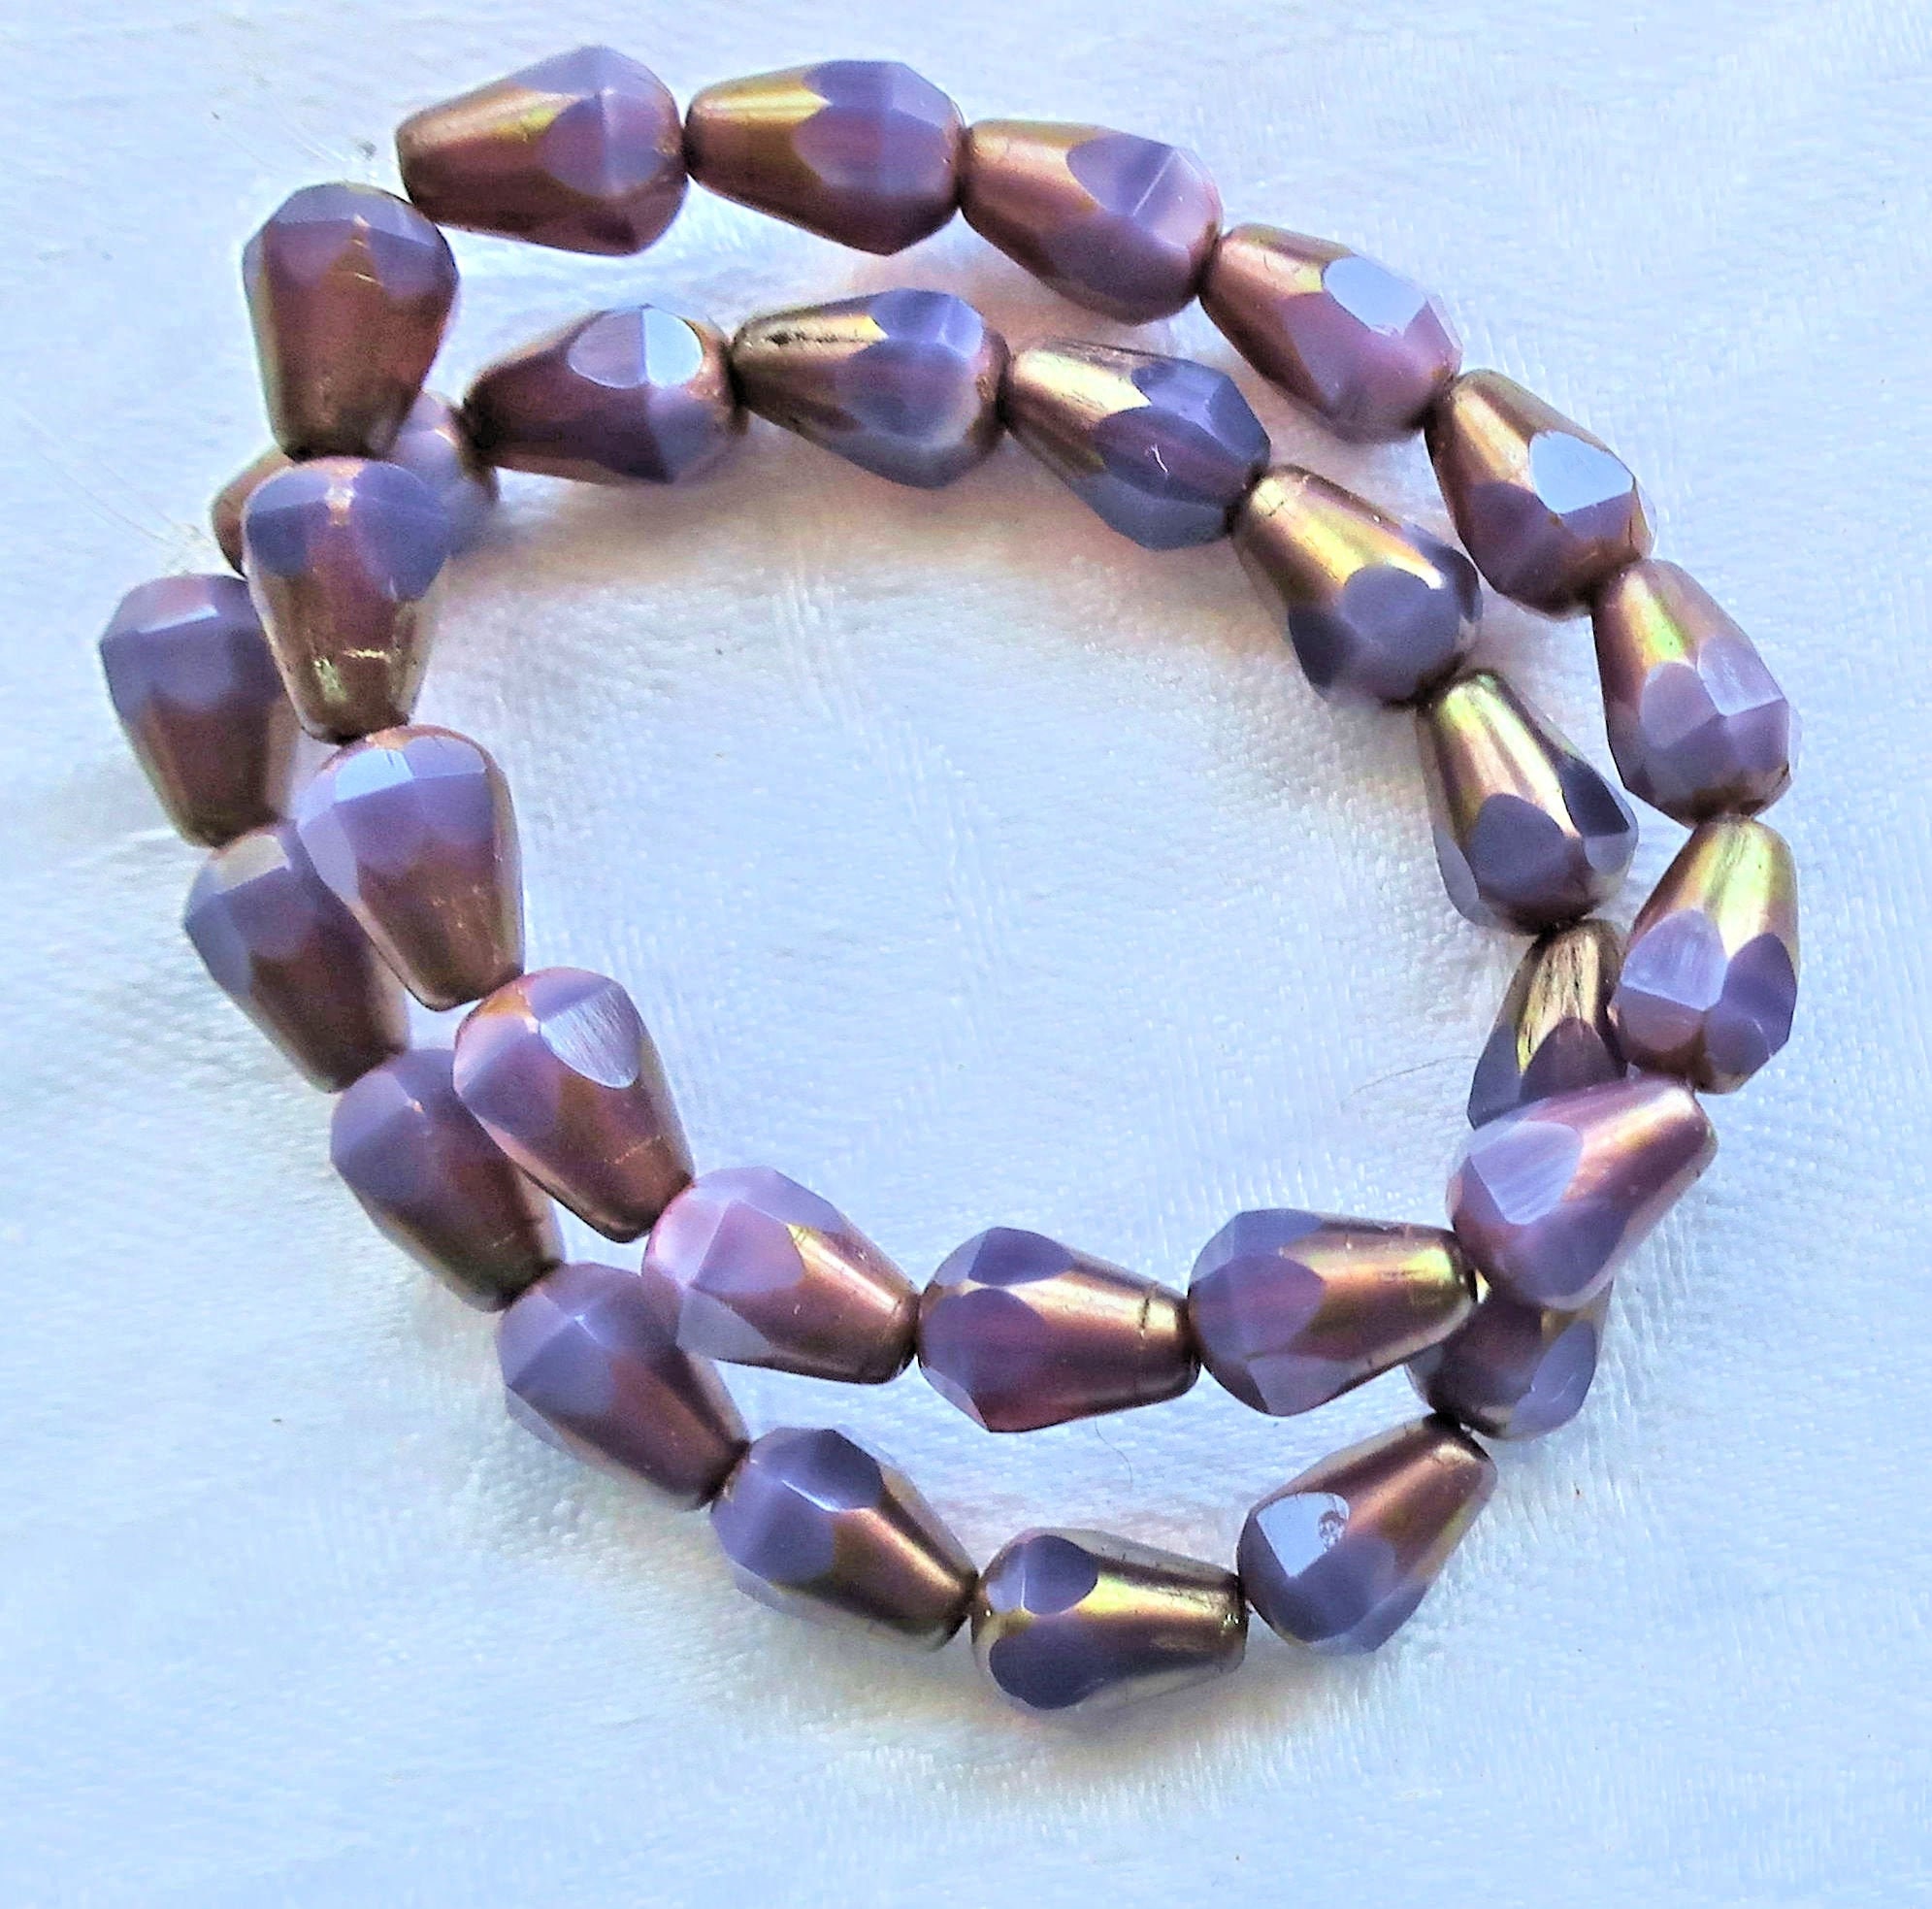 special cut 8 x 6mm faceted firepolished beads C82101 blue opal with a marbled purple Lot of 15 Czech glass teardrop beads gold finish